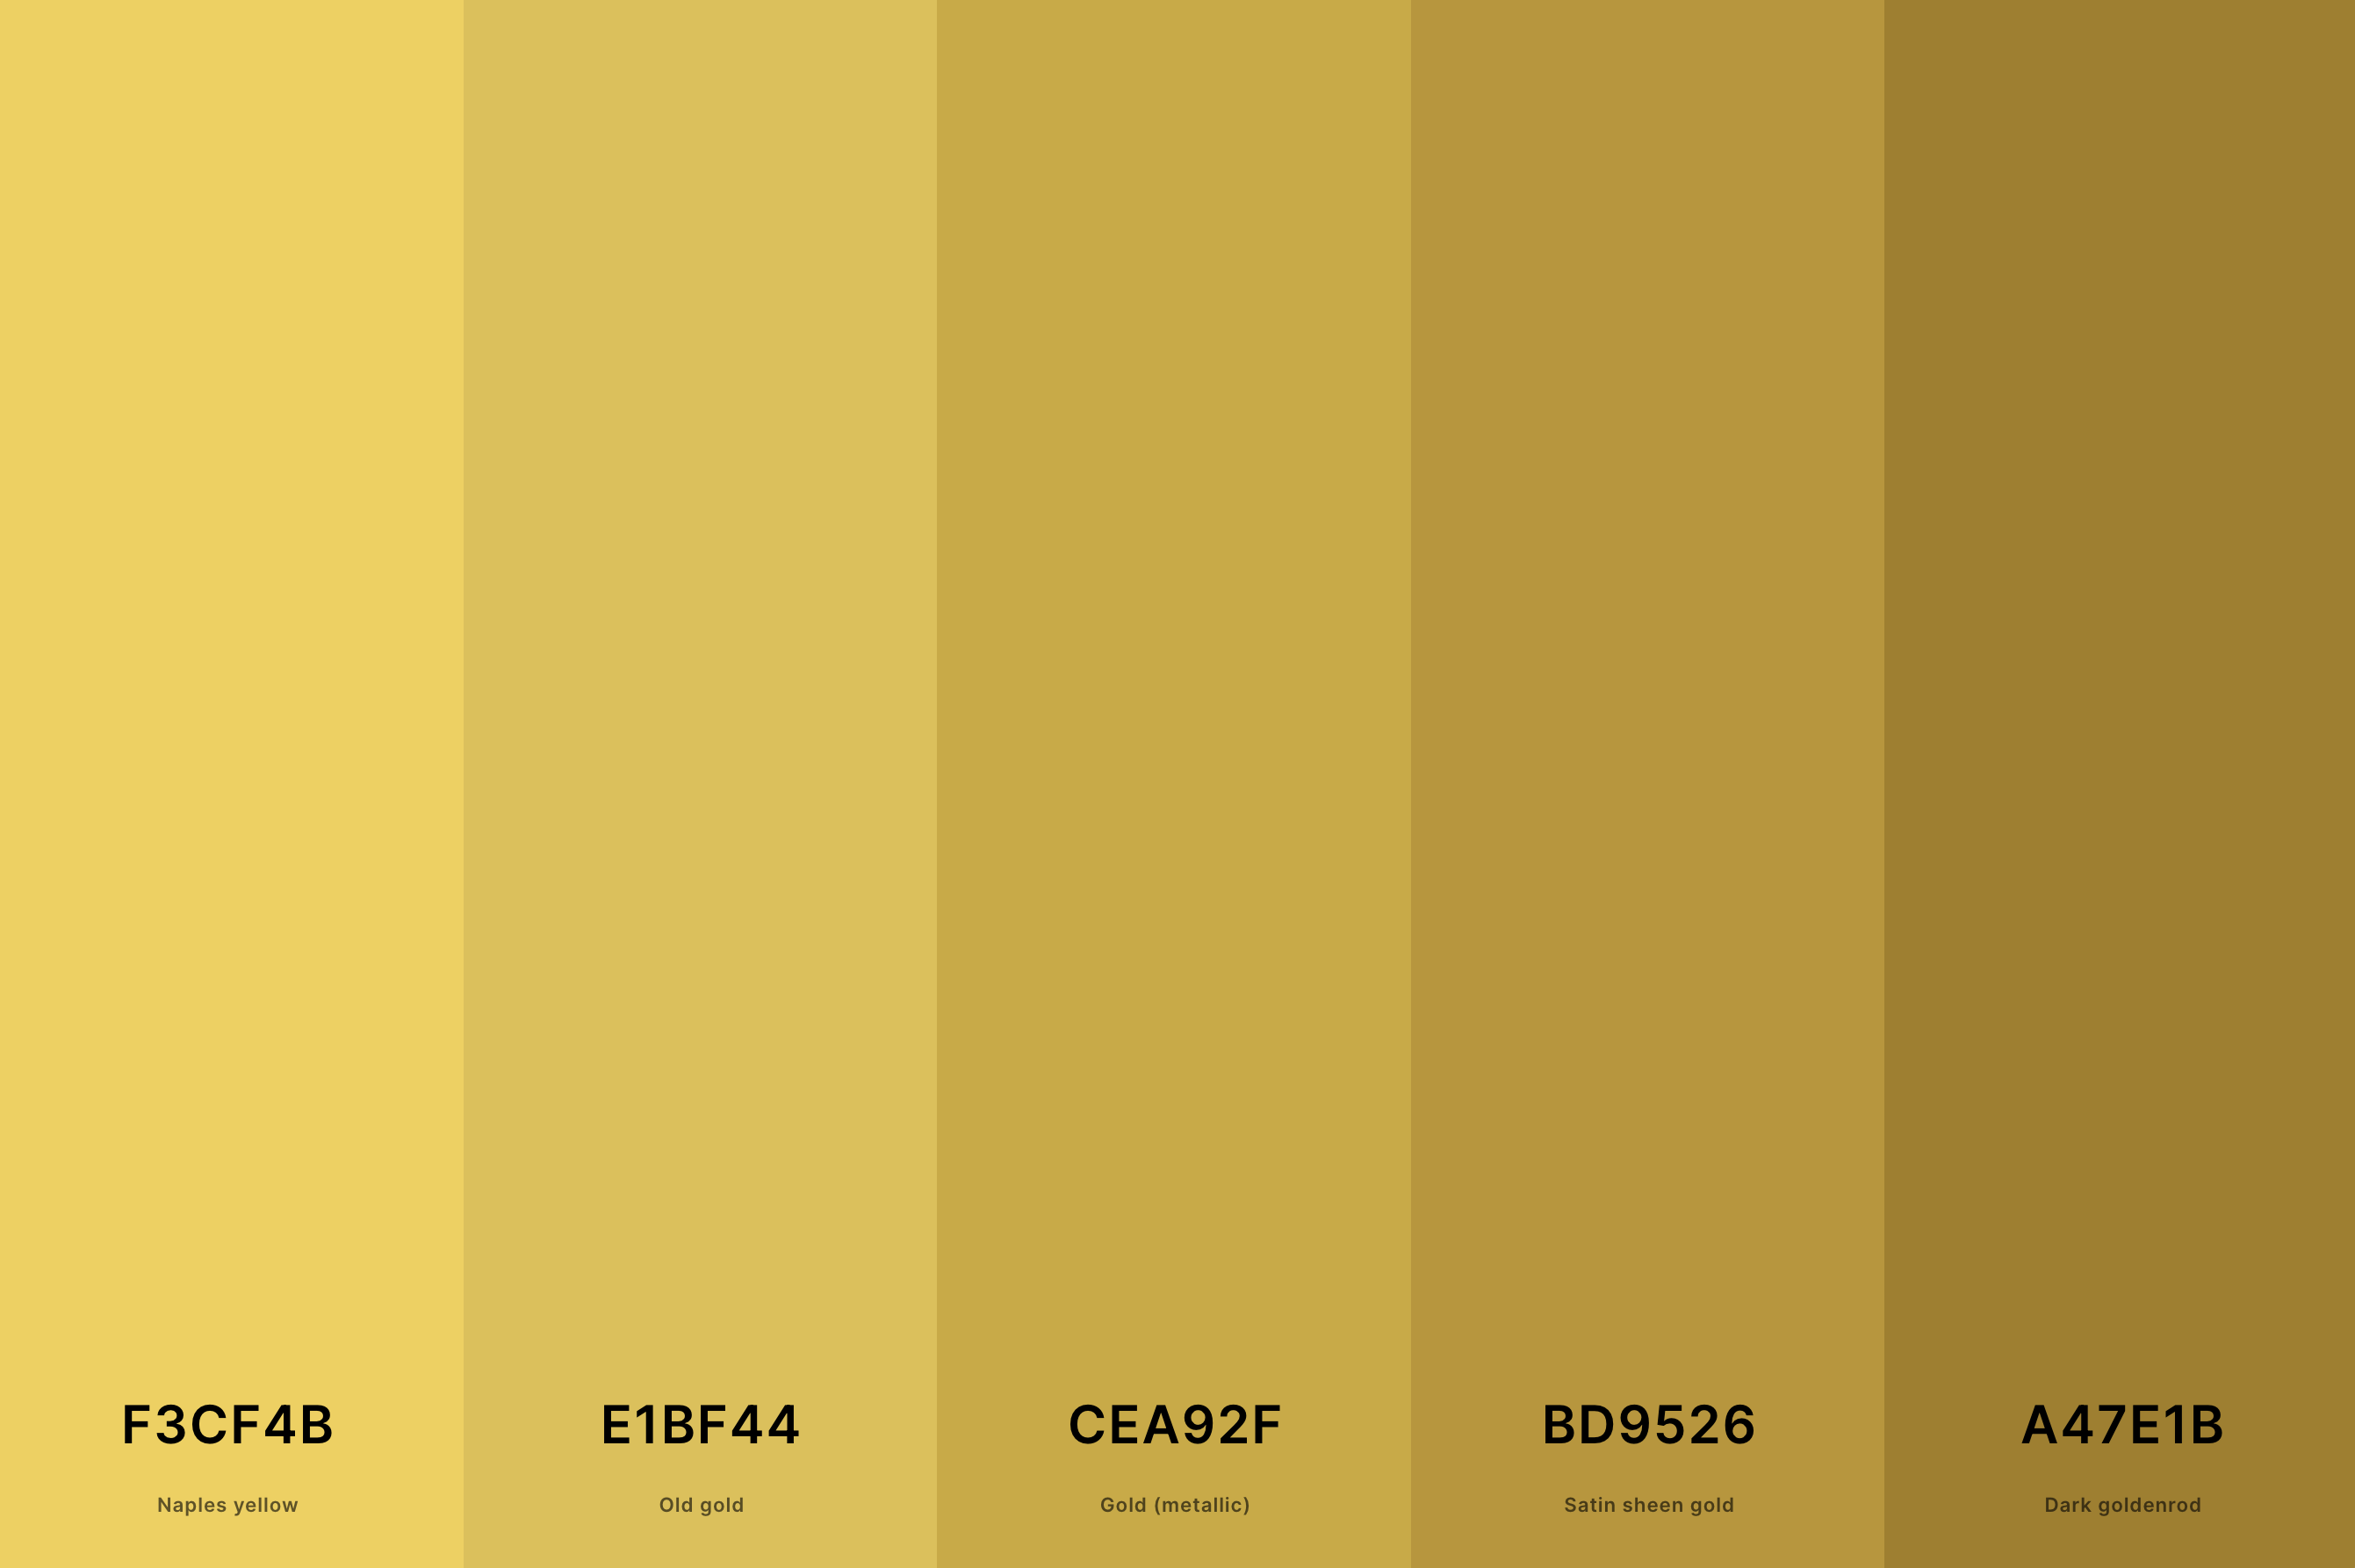 26. Yellow Gold Color Palette Color Palette with Naples Yellow (Hex #F3CF4B) + Old Gold (Hex #E1BF44) + Gold (Metallic) (Hex #CEA92F) + Satin Sheen Gold (Hex #BD9526) + Dark Goldenrod (Hex #A47E1B) Color Palette with Hex Codes